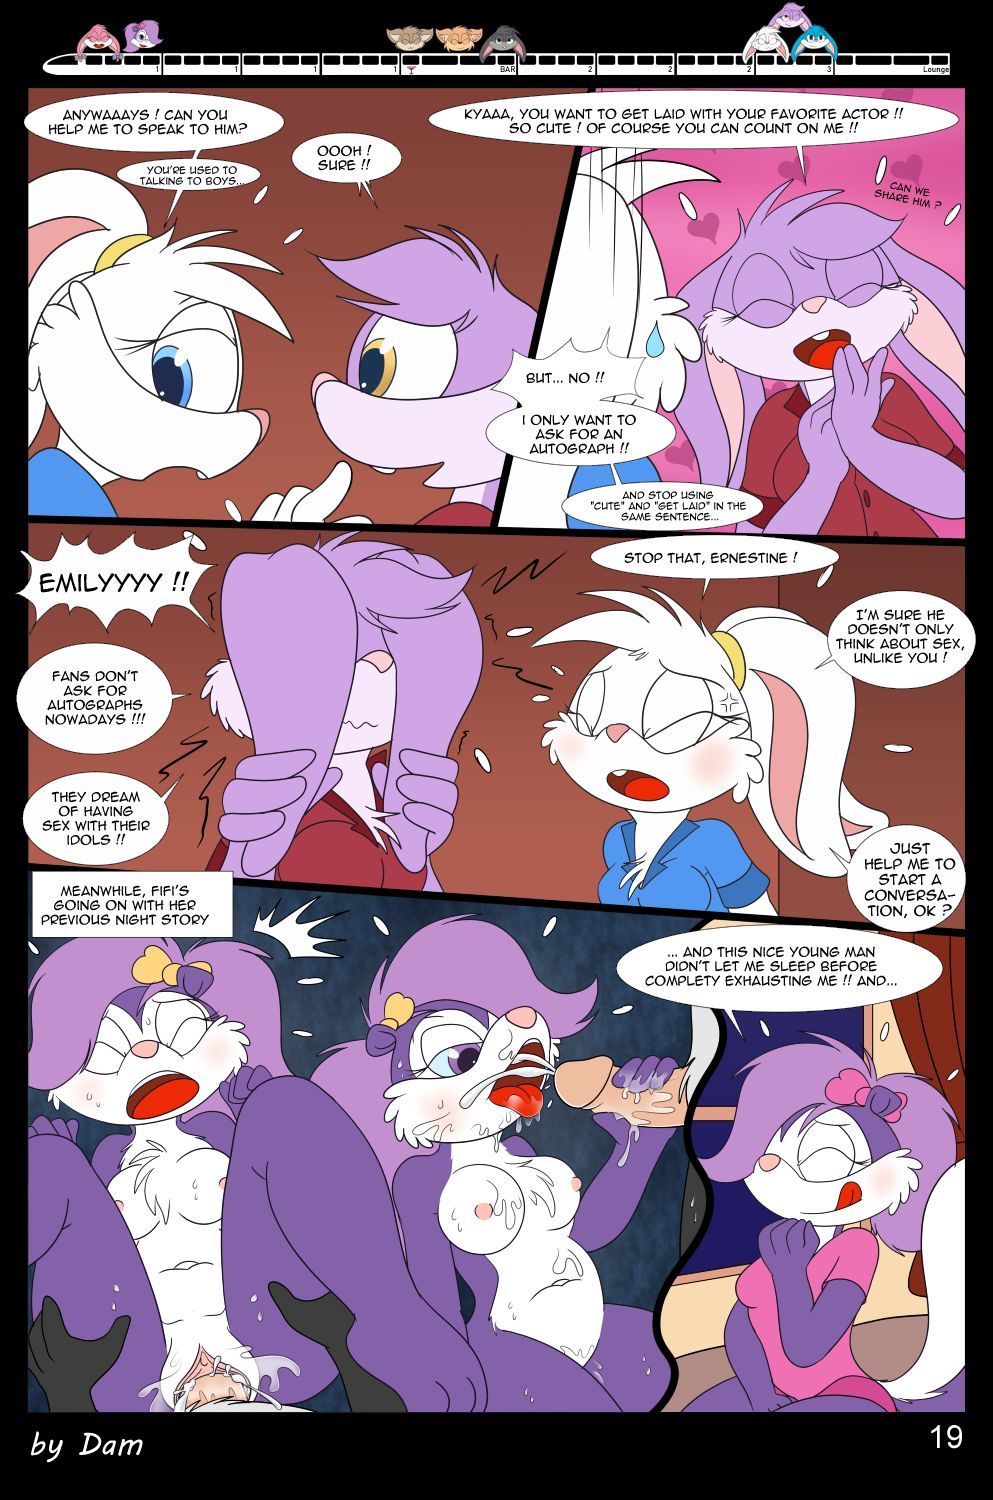 [Dam] Toons on a train [Ongoing] 19